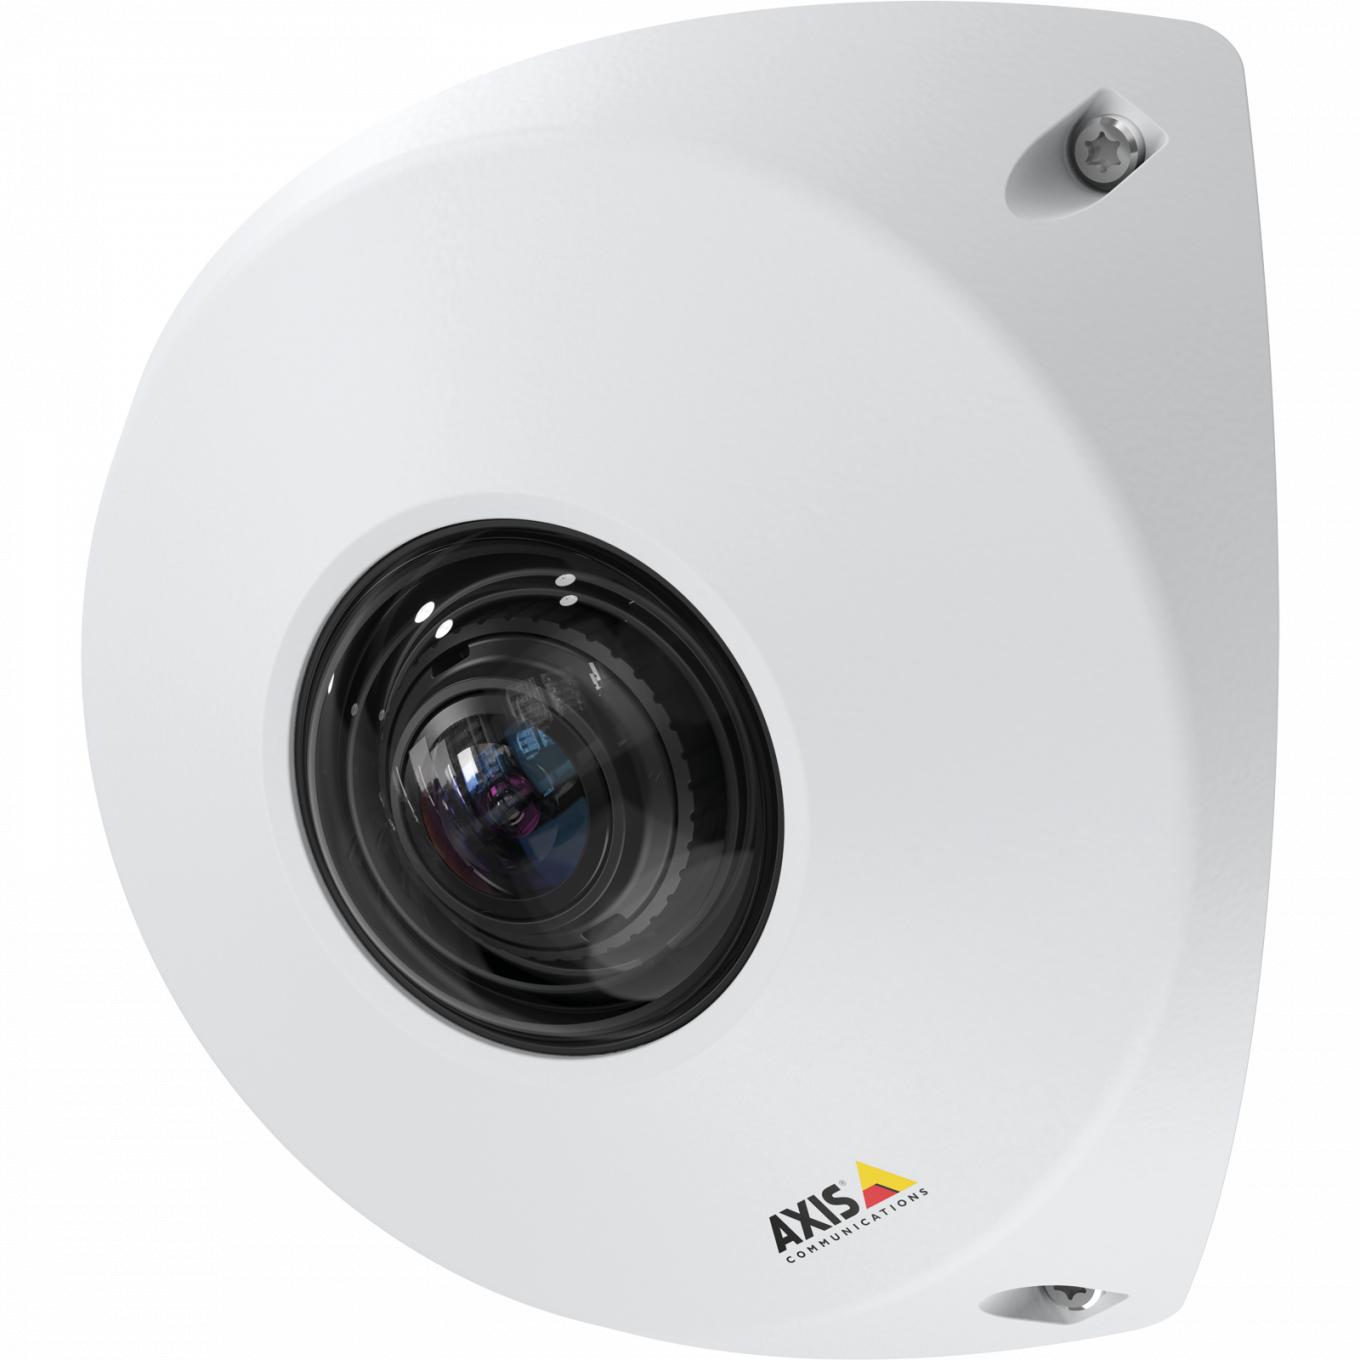 AXIS P9106-V in white color. The product is viewed from its left angle.